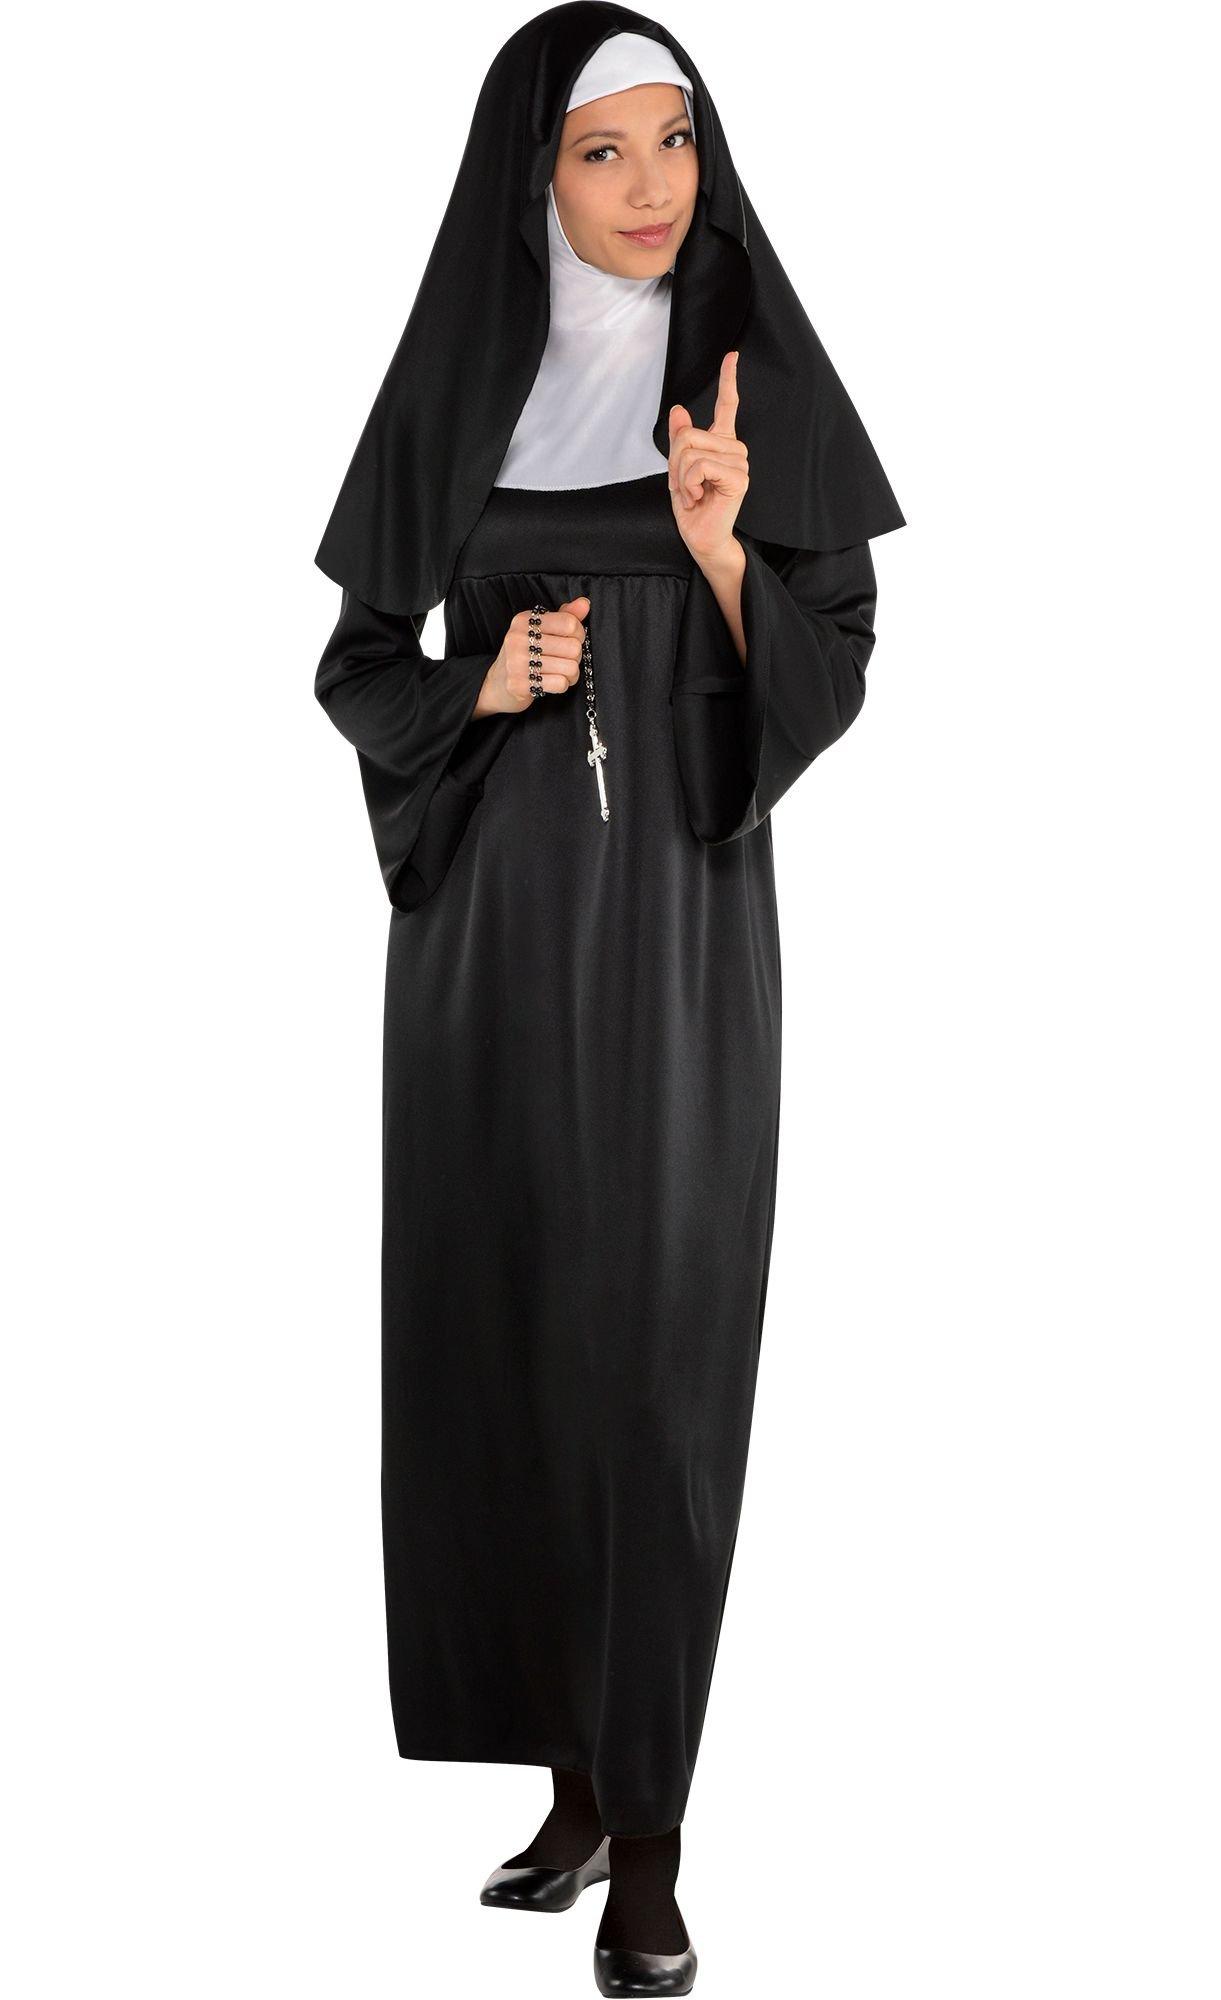 Nun Costume For Women Party City